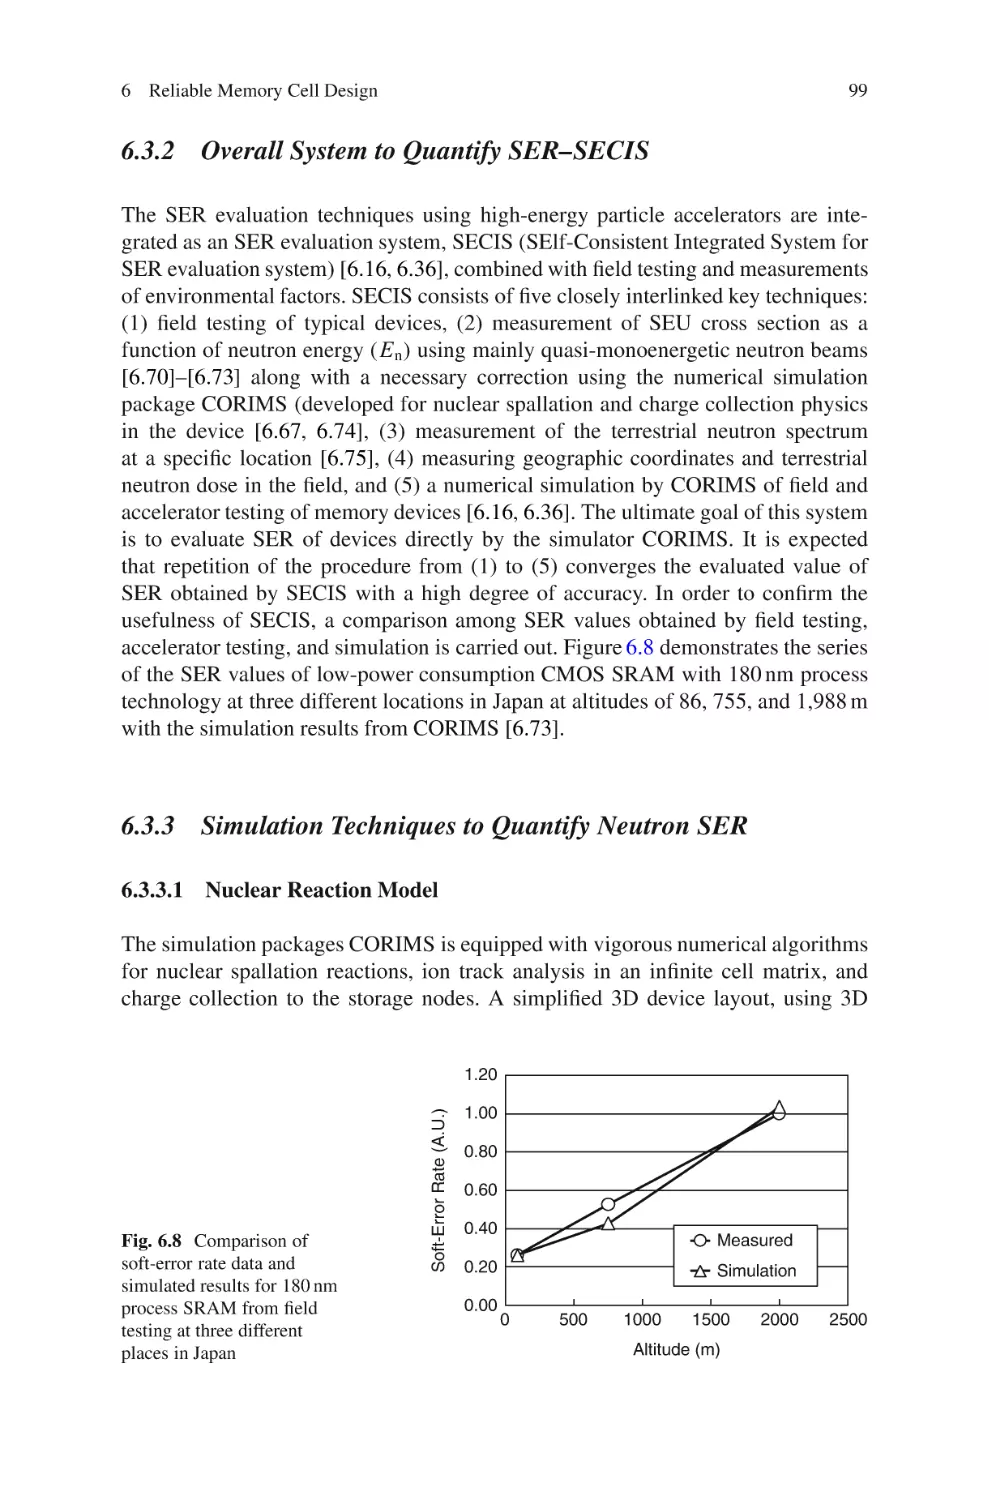 6.3.2 Overall System to Quantify SER–SECIS
6.3.3 Simulation Techniques to Quantify Neutron SER
6.3.3.1 Nuclear Reaction Model